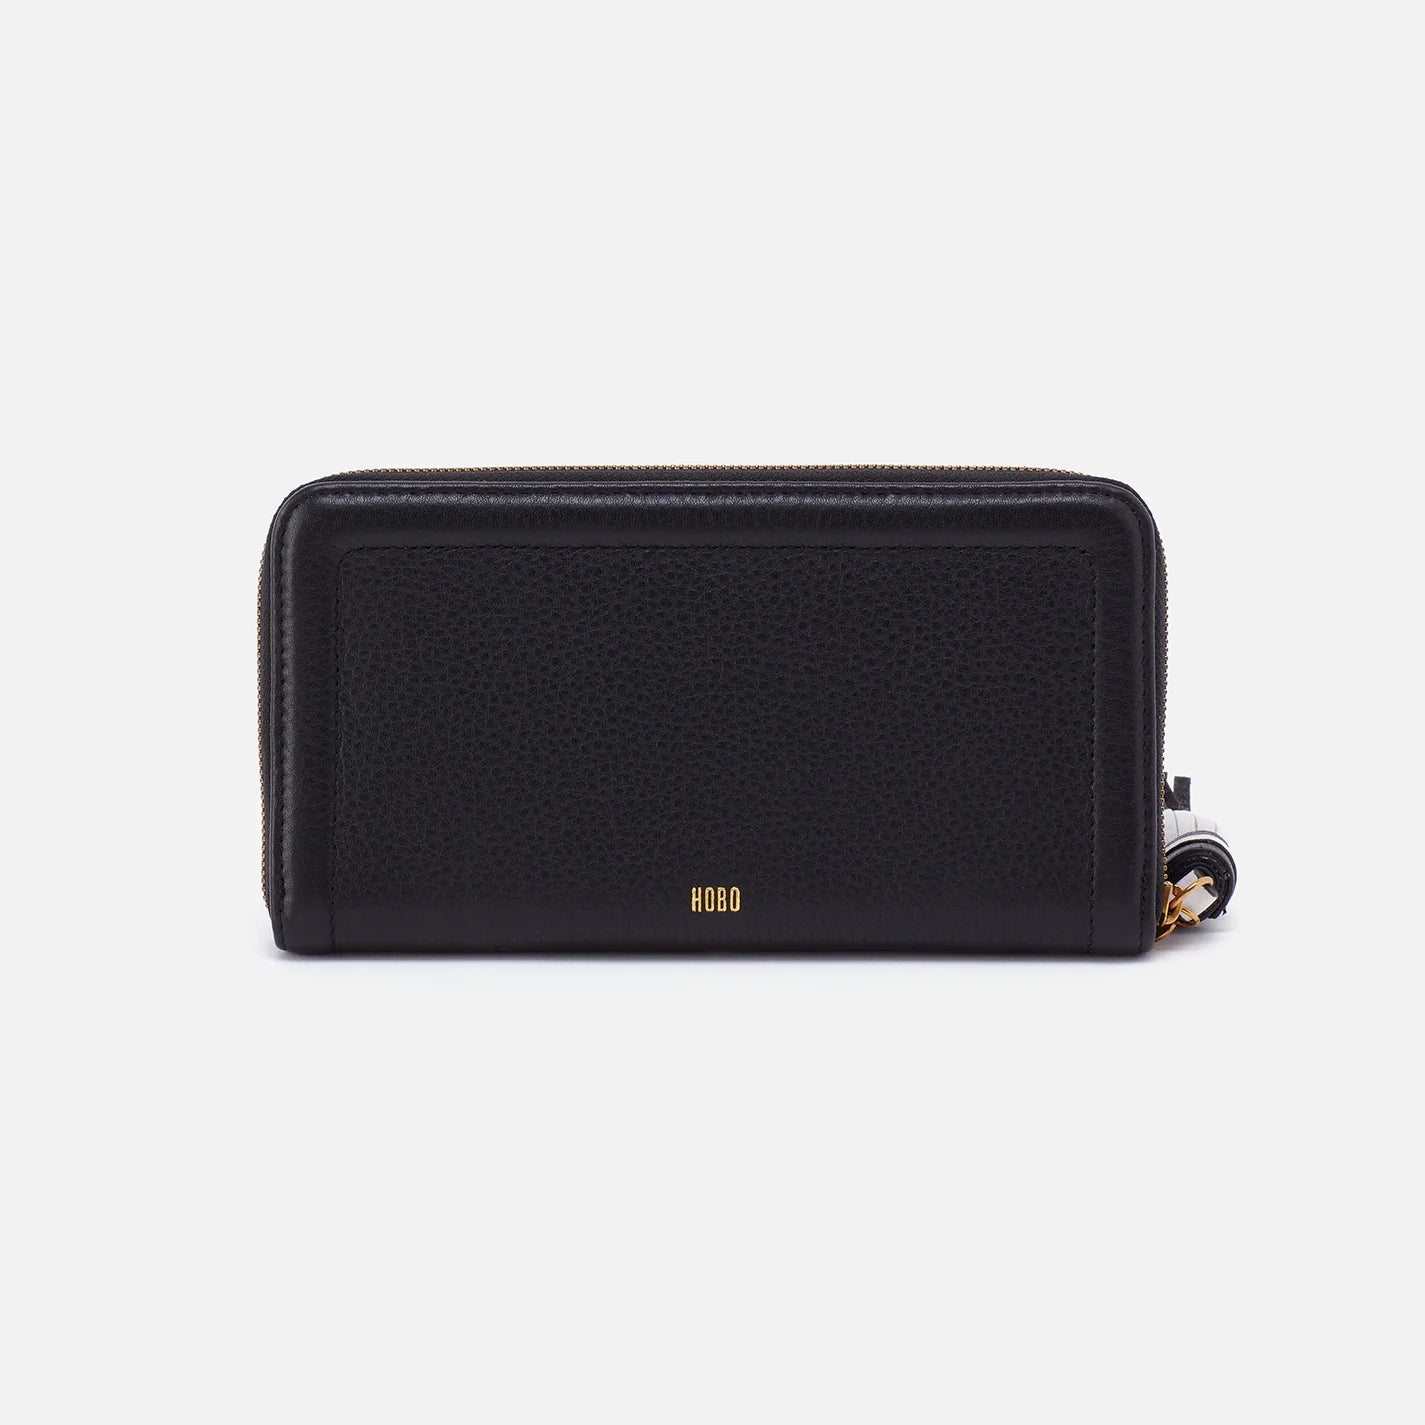 The Nila Large Zip Around Wallet in black is a continental design with interior organization for your cash and cards and a leather tassel zipper for added style and functionality. Check it out at the Painted Cottage in Edgewater, MD